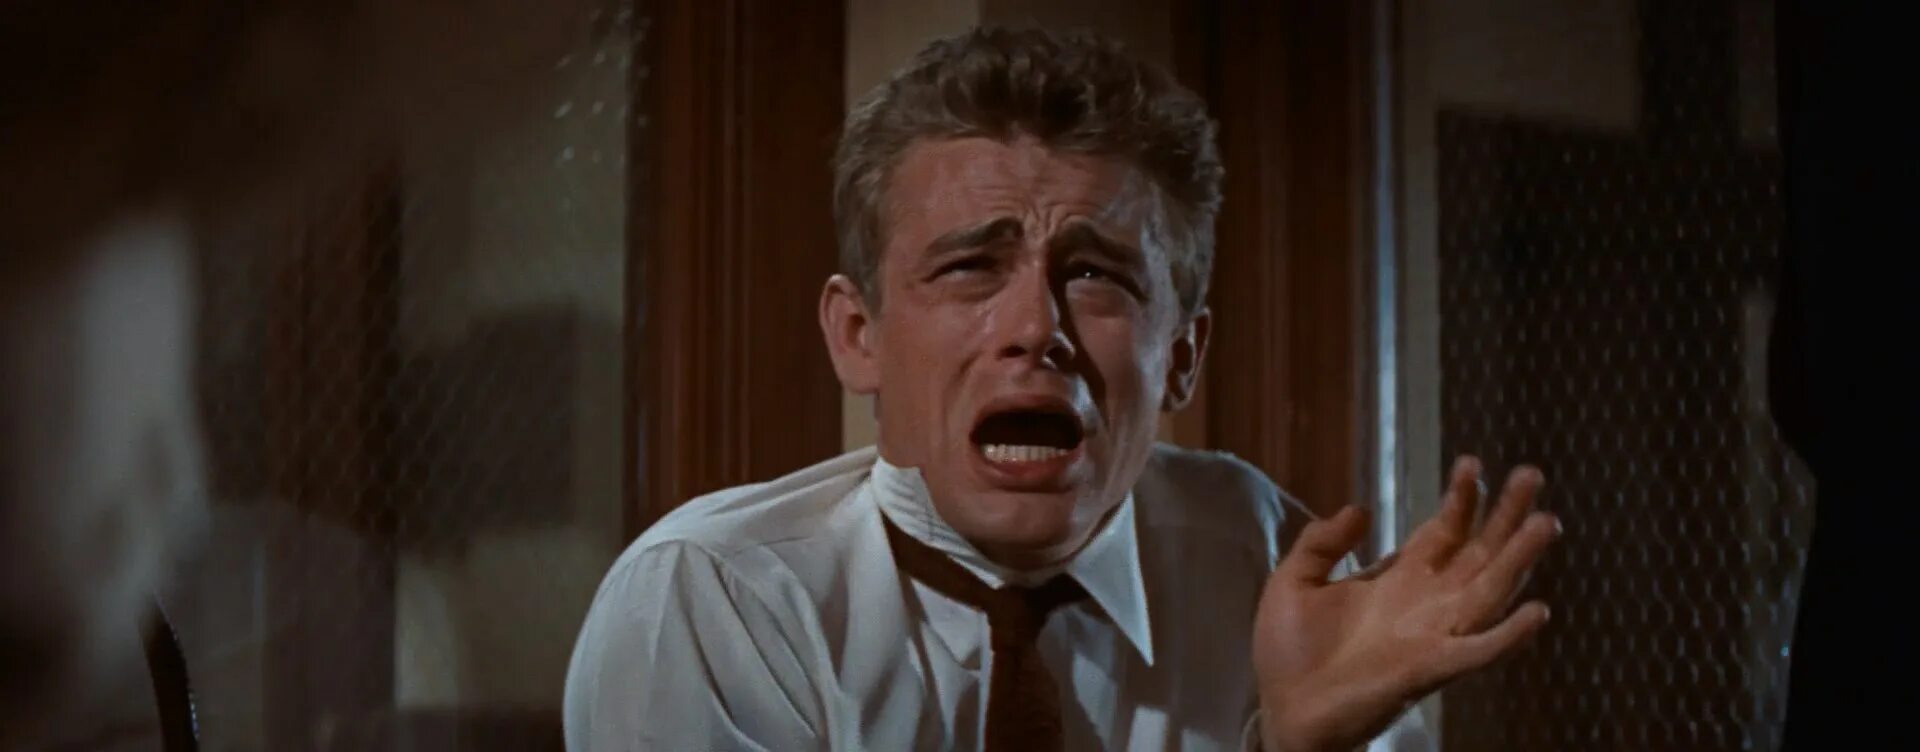 What did he mean. You tearing me Apart. You tearing me Apart James Dean. You are tearing me Apart.